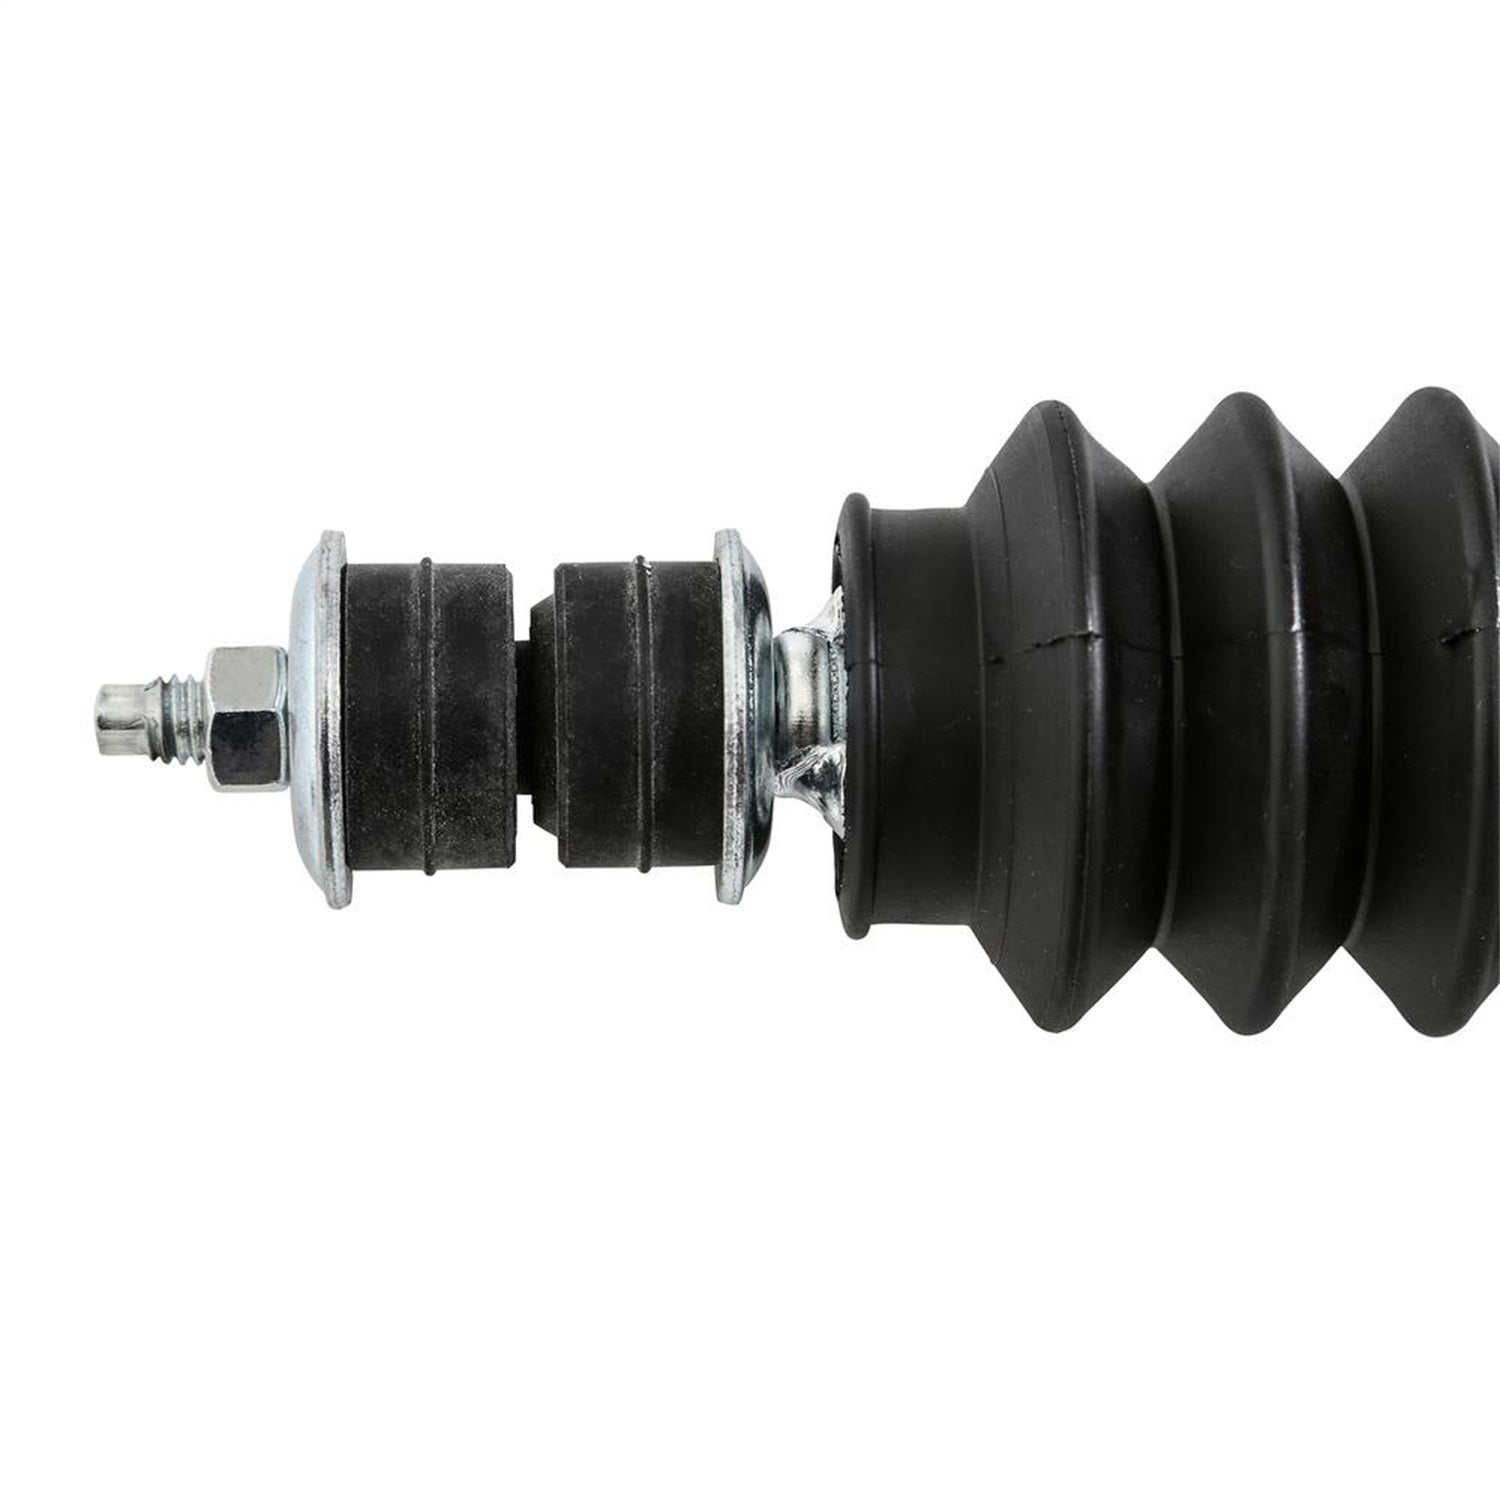 Pro Comp Suspension ZX2056 Pro Runner SS Monotube Shock Absorber